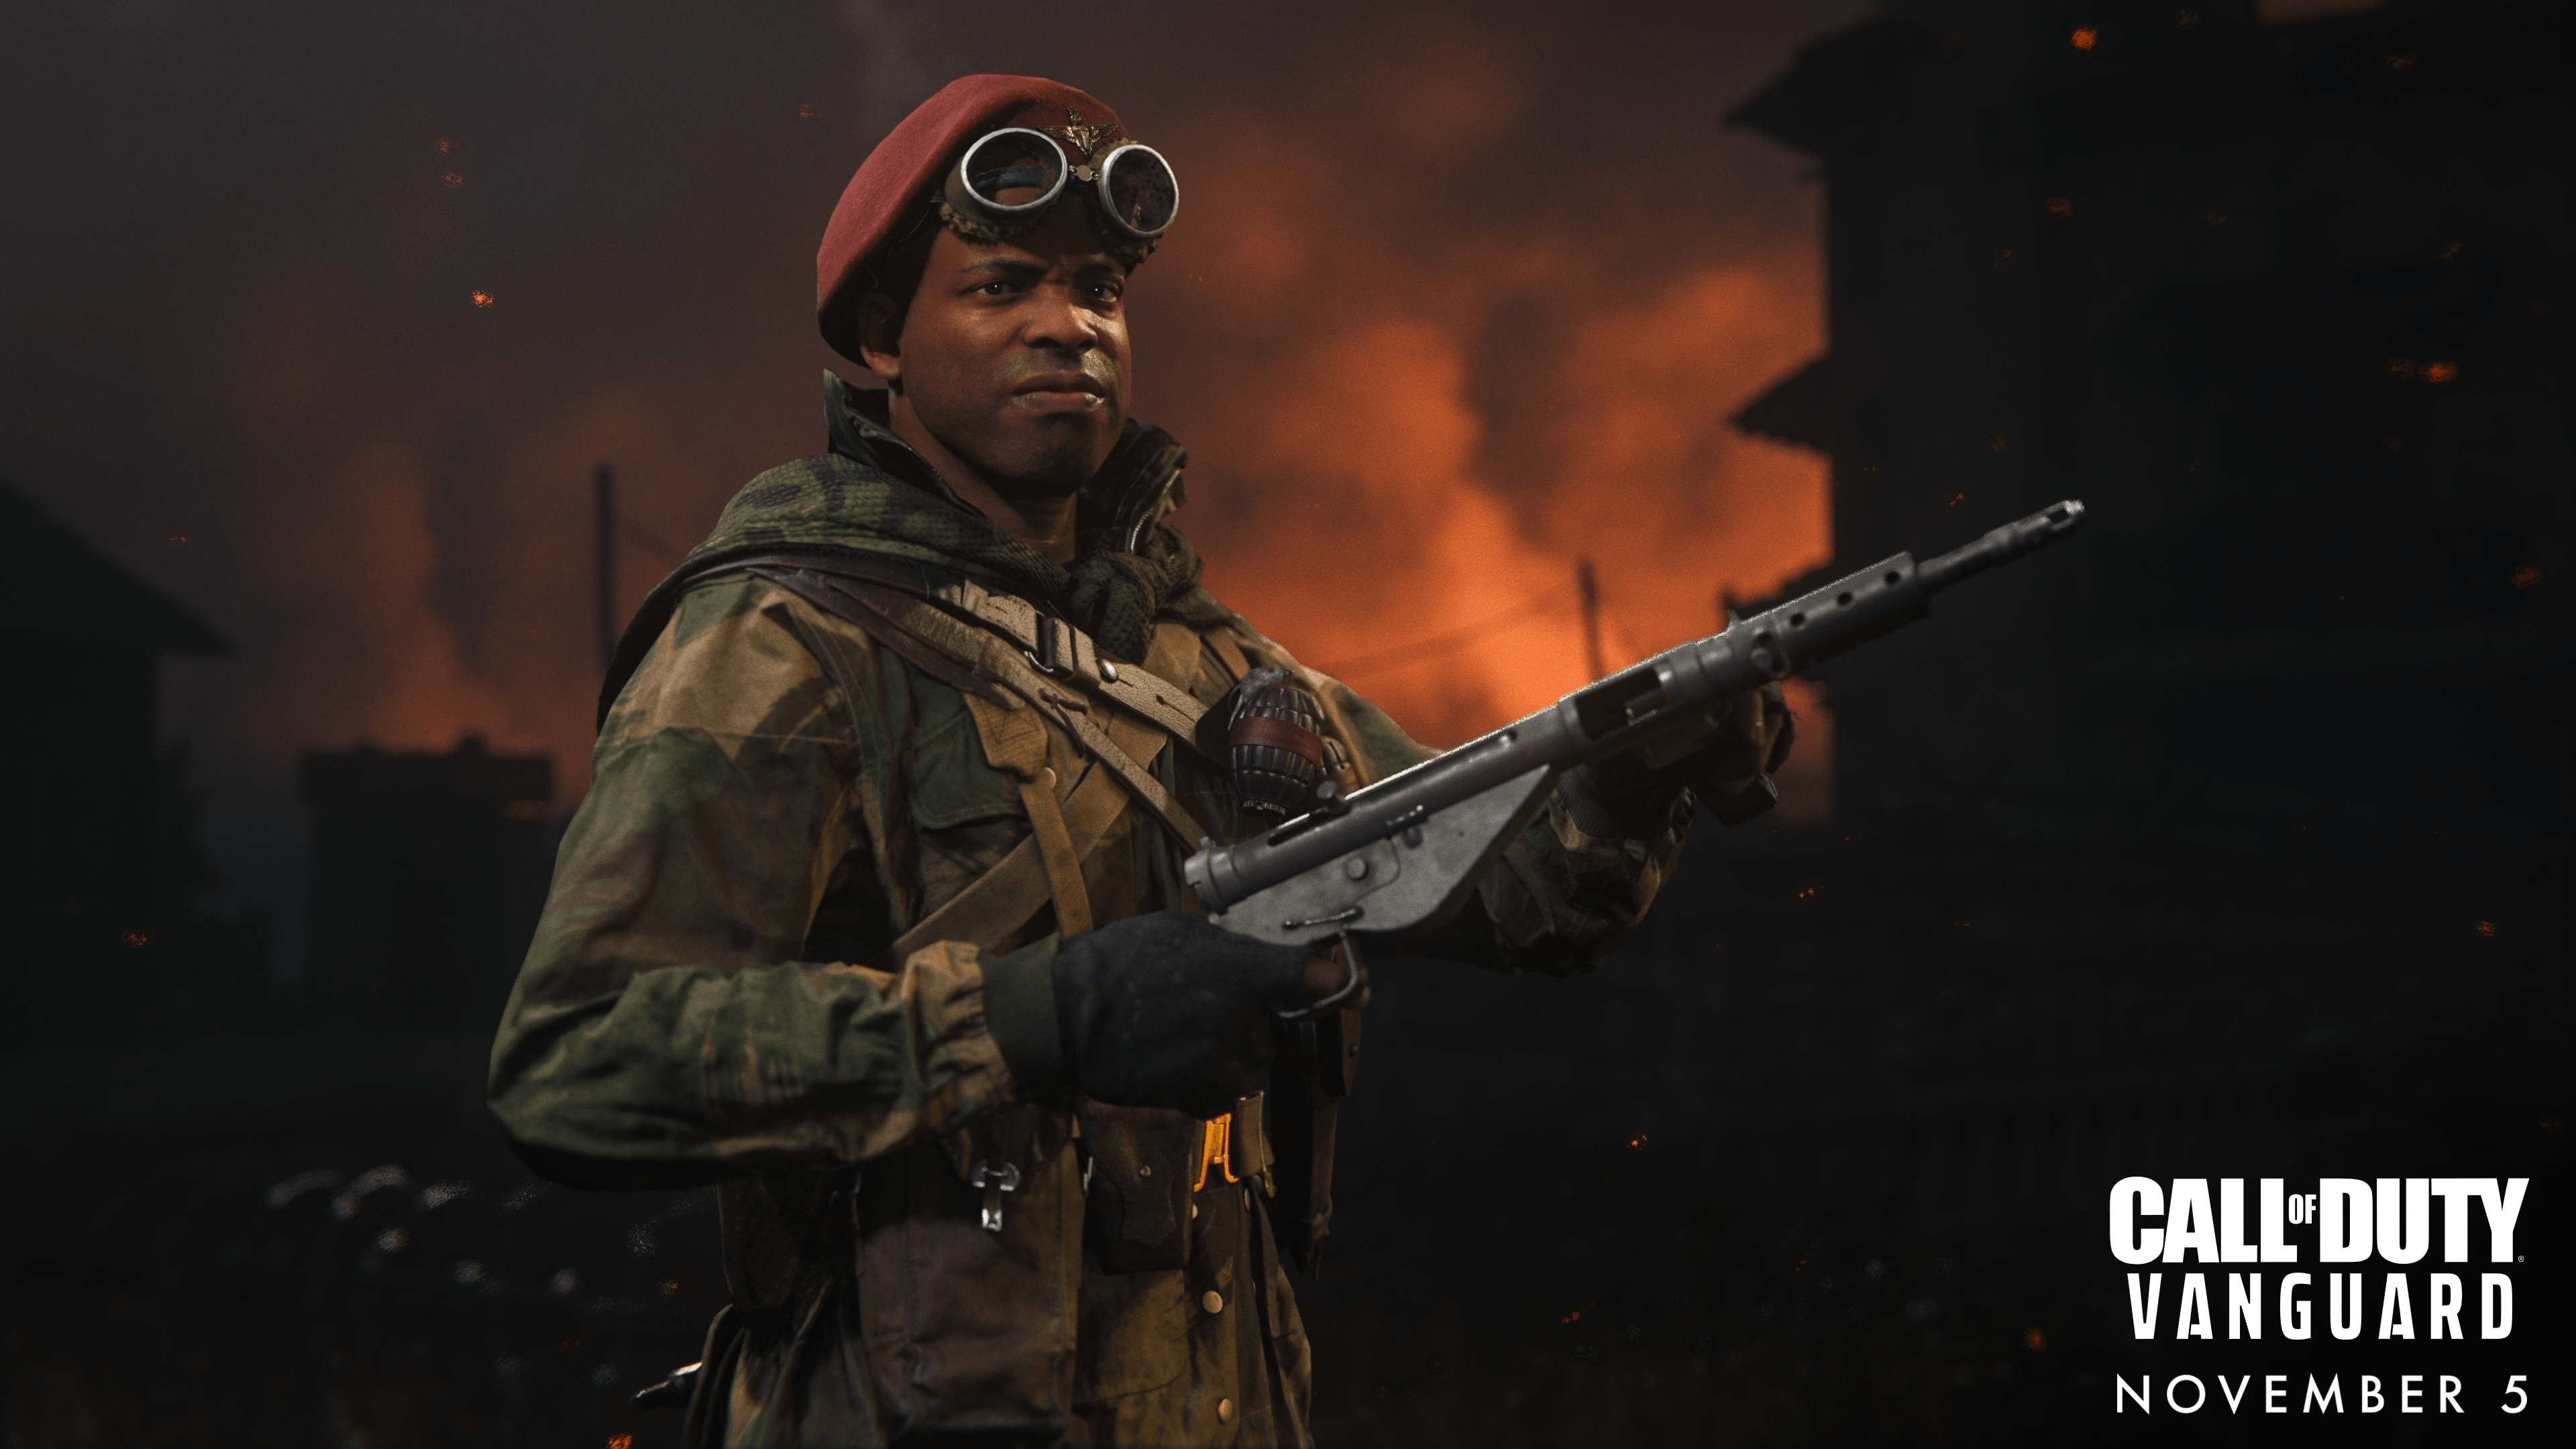 Image of Kingsley from the campaign of Call of Duty: Vanguard